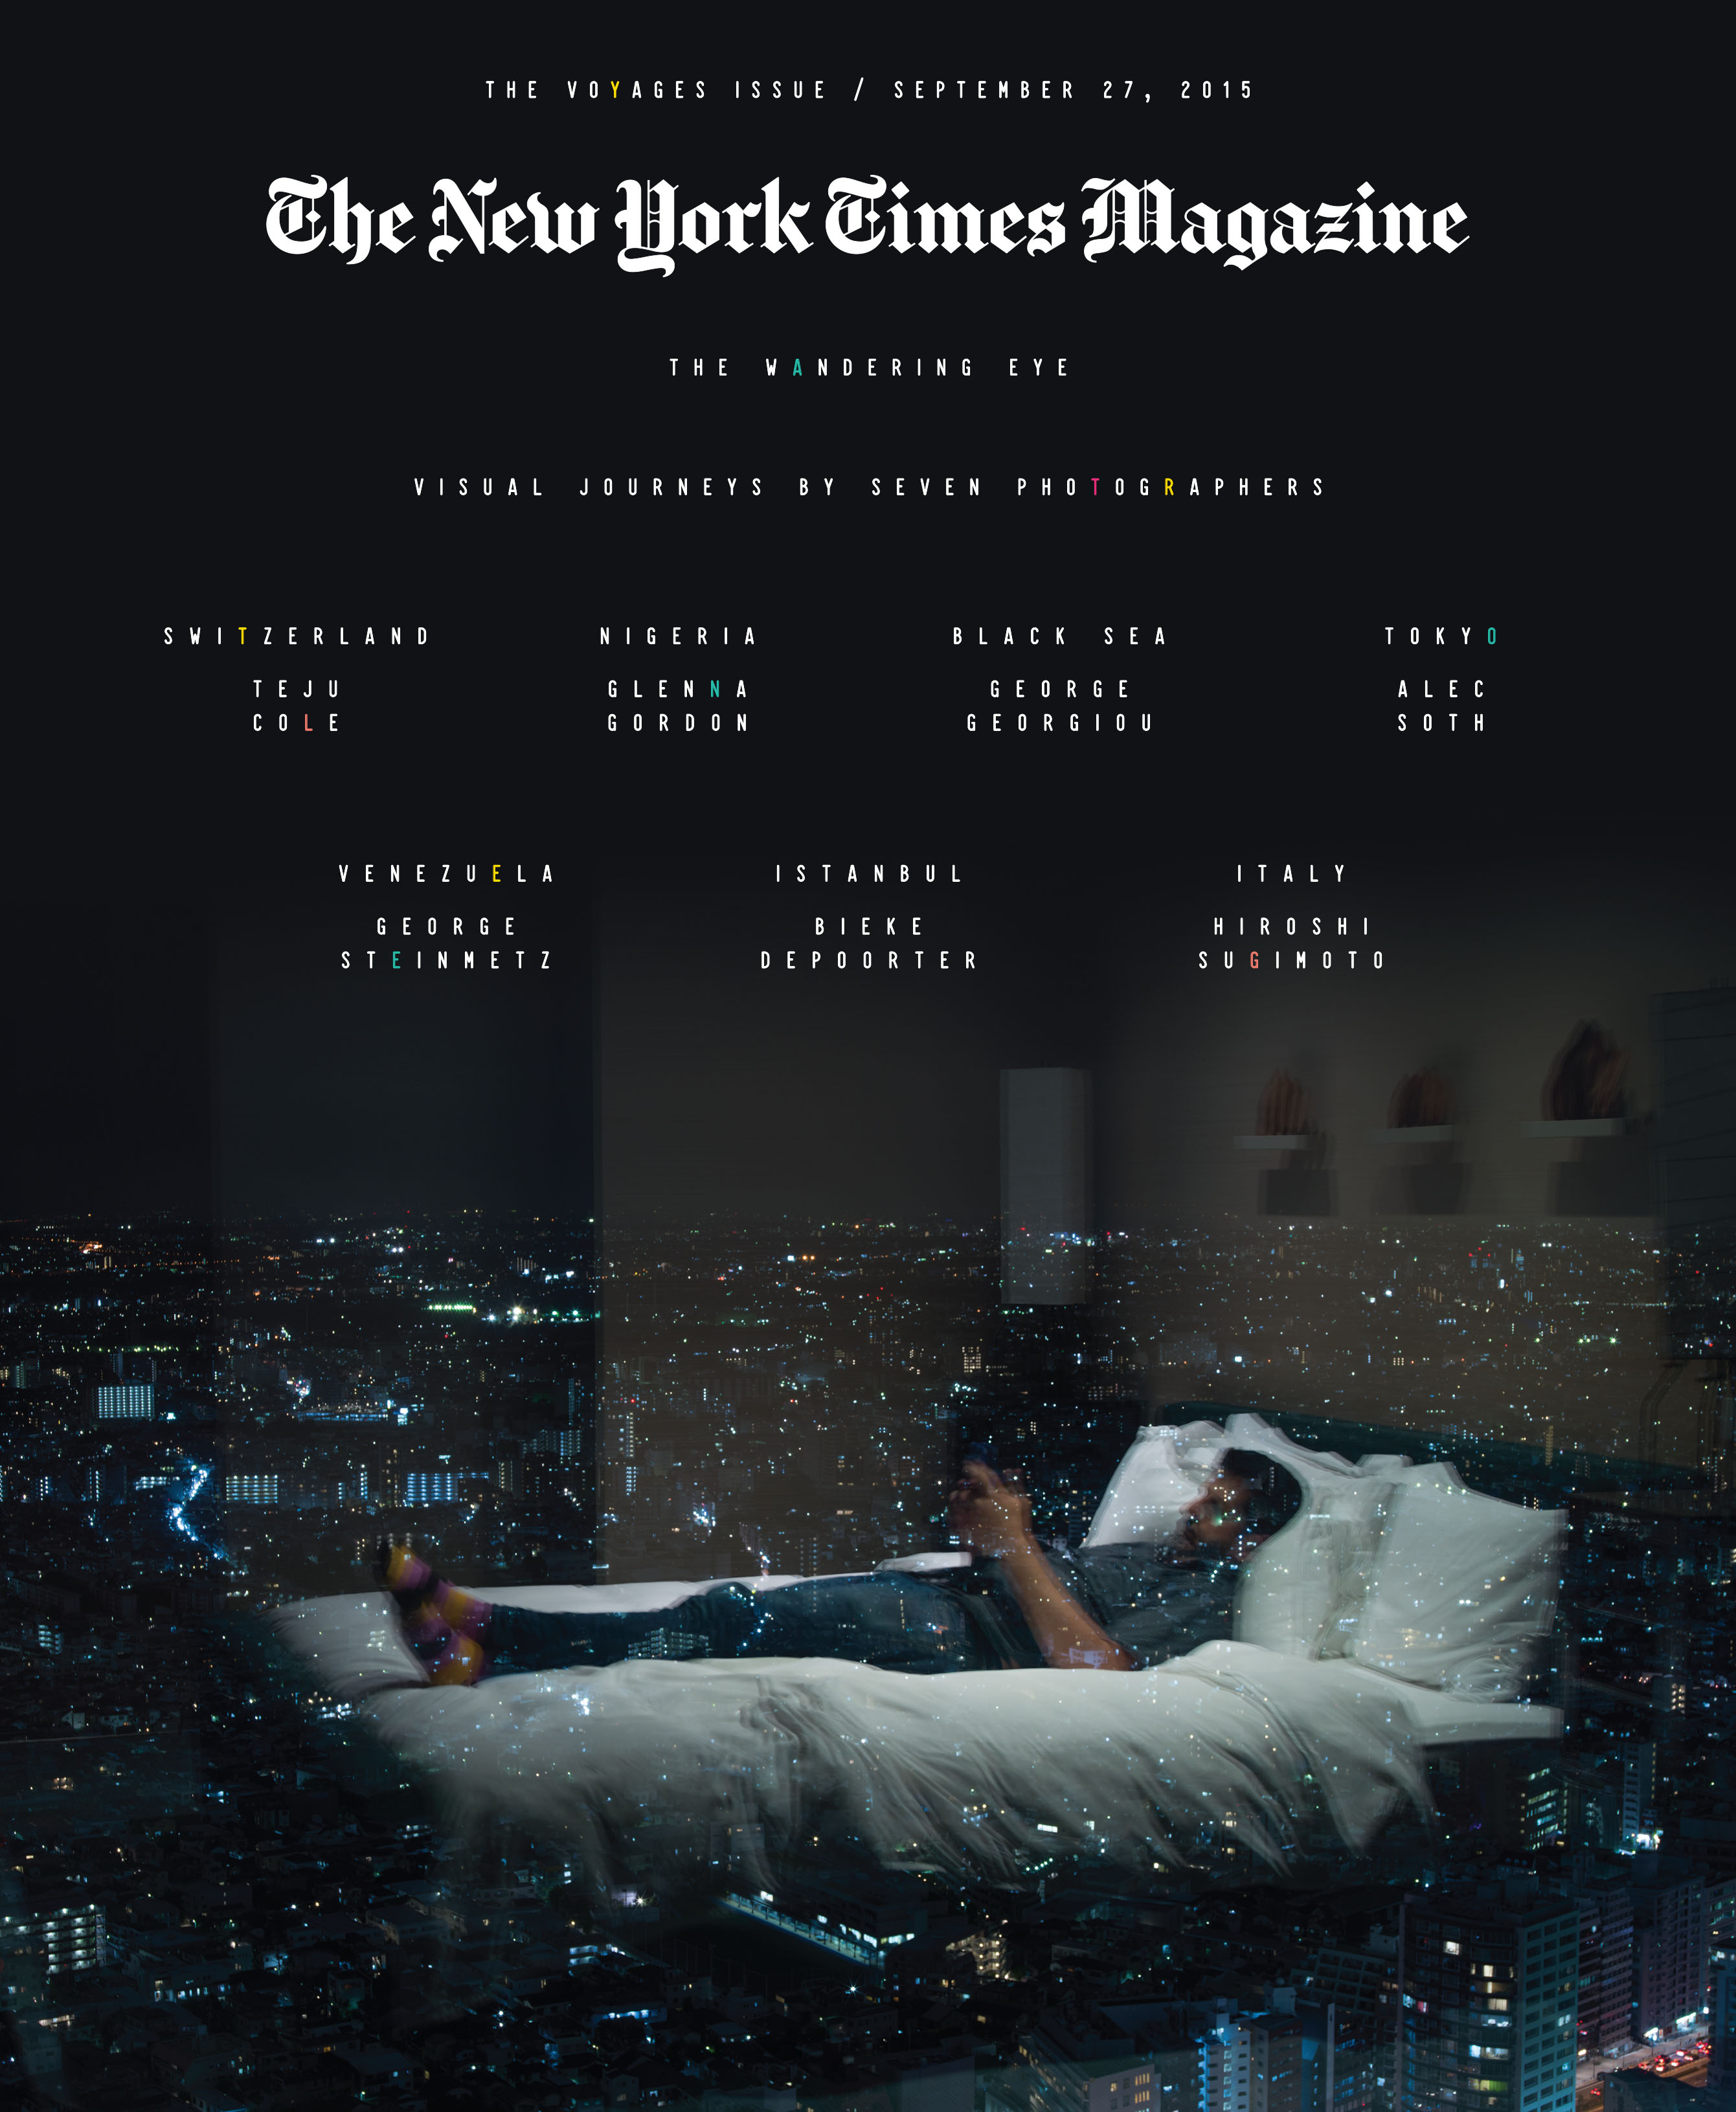 The New York Times Magazine-"The Voyages Issue," September 27